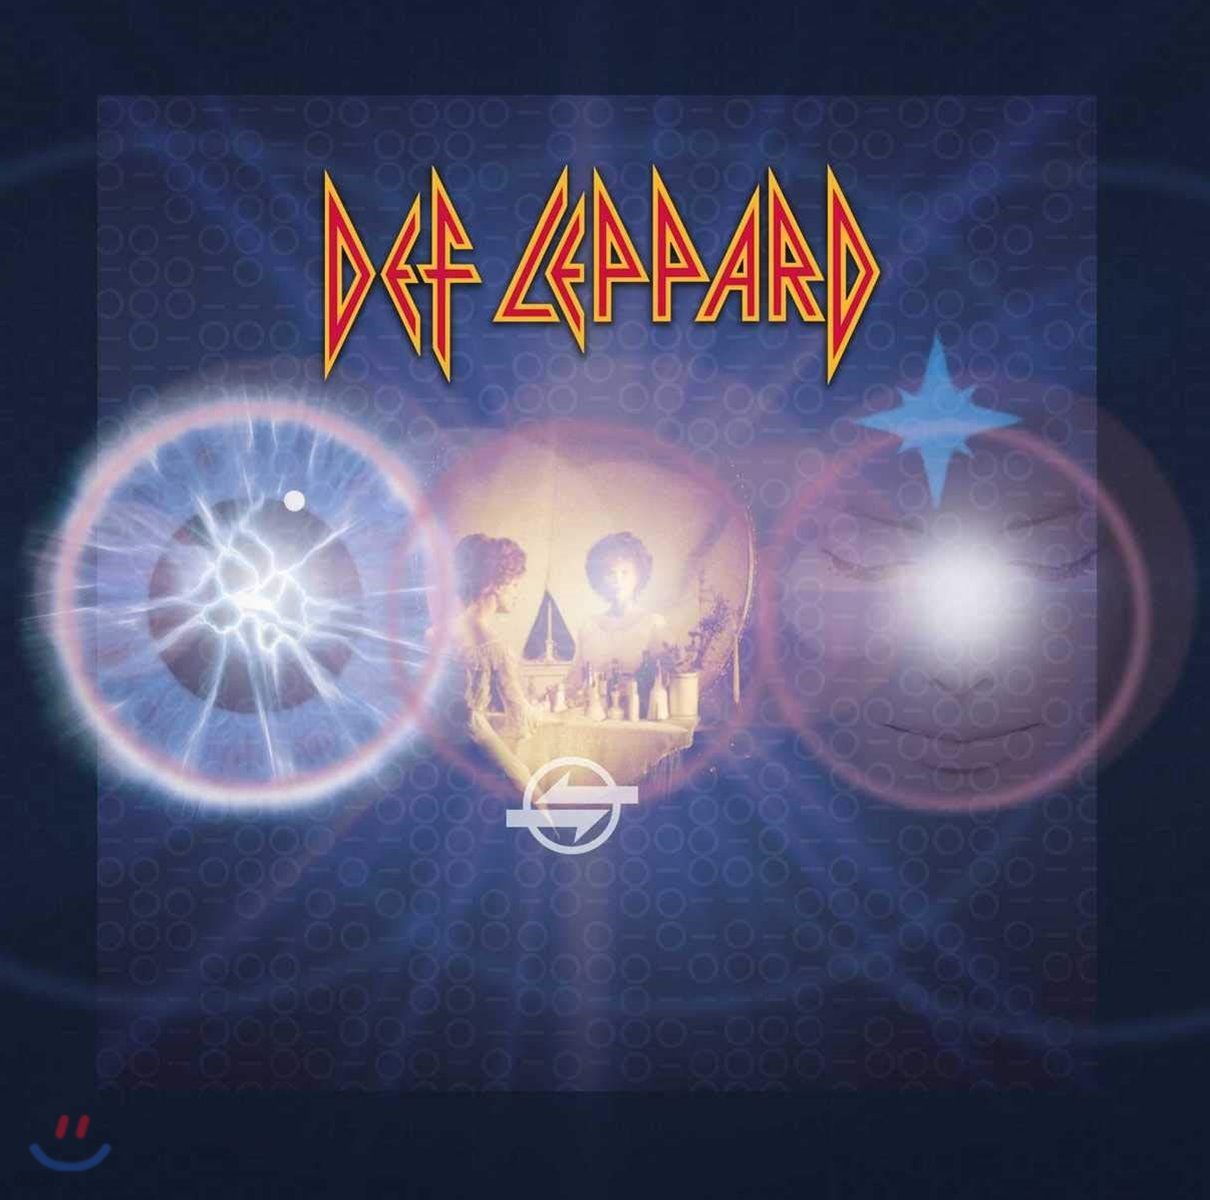 Def Leppard (데프 레퍼드) - The CD Collection: Volume Two